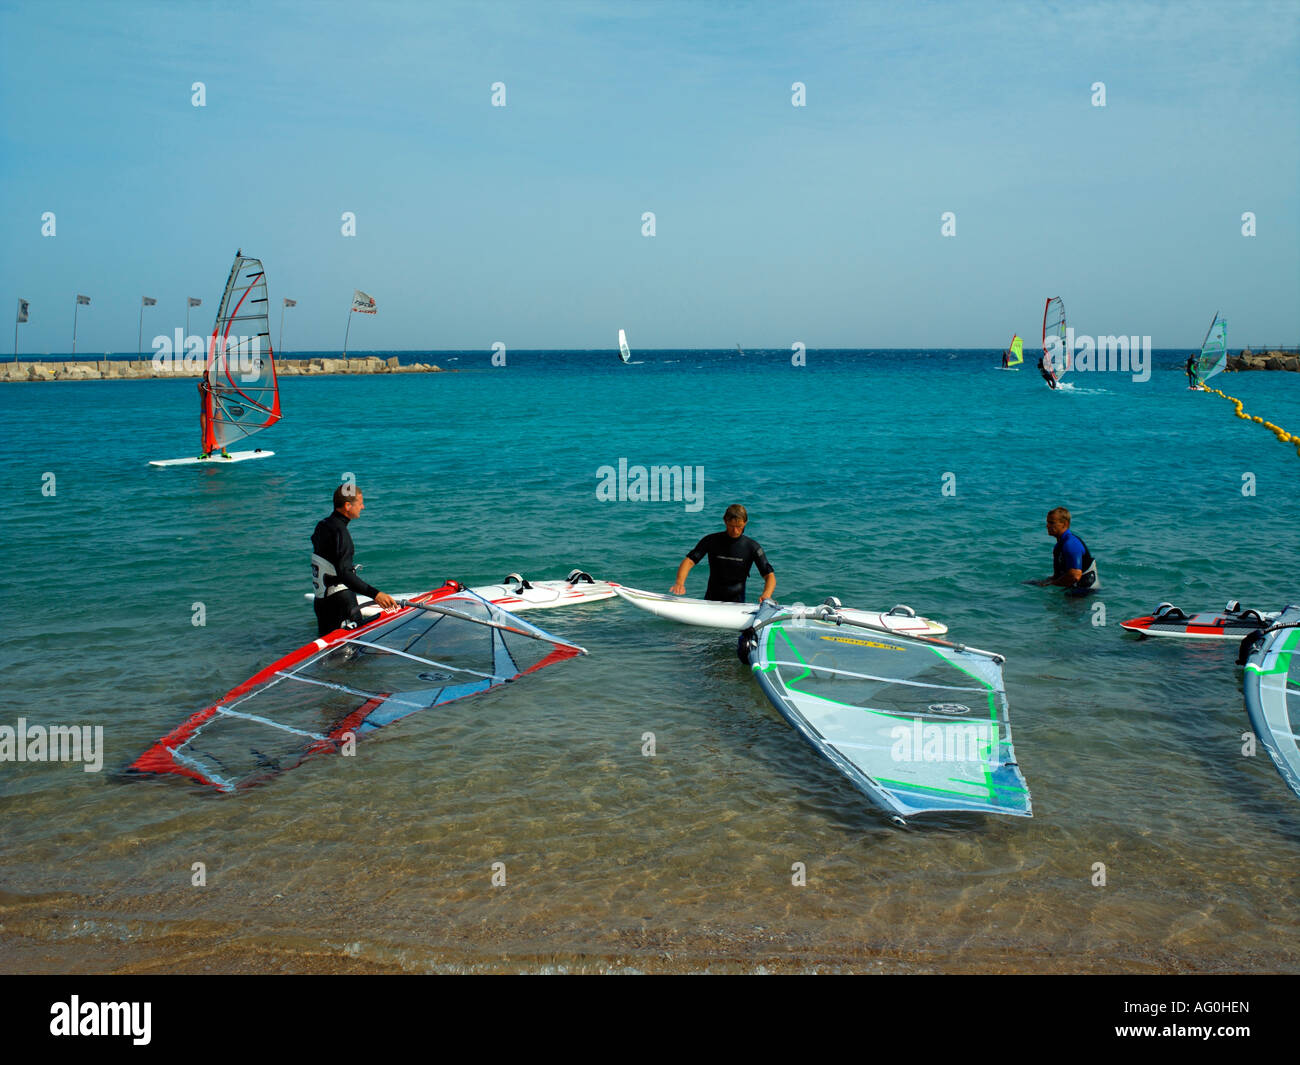 Windsurfers at the Hilton Hotel Watersports Centre Hurghada Stock Photo